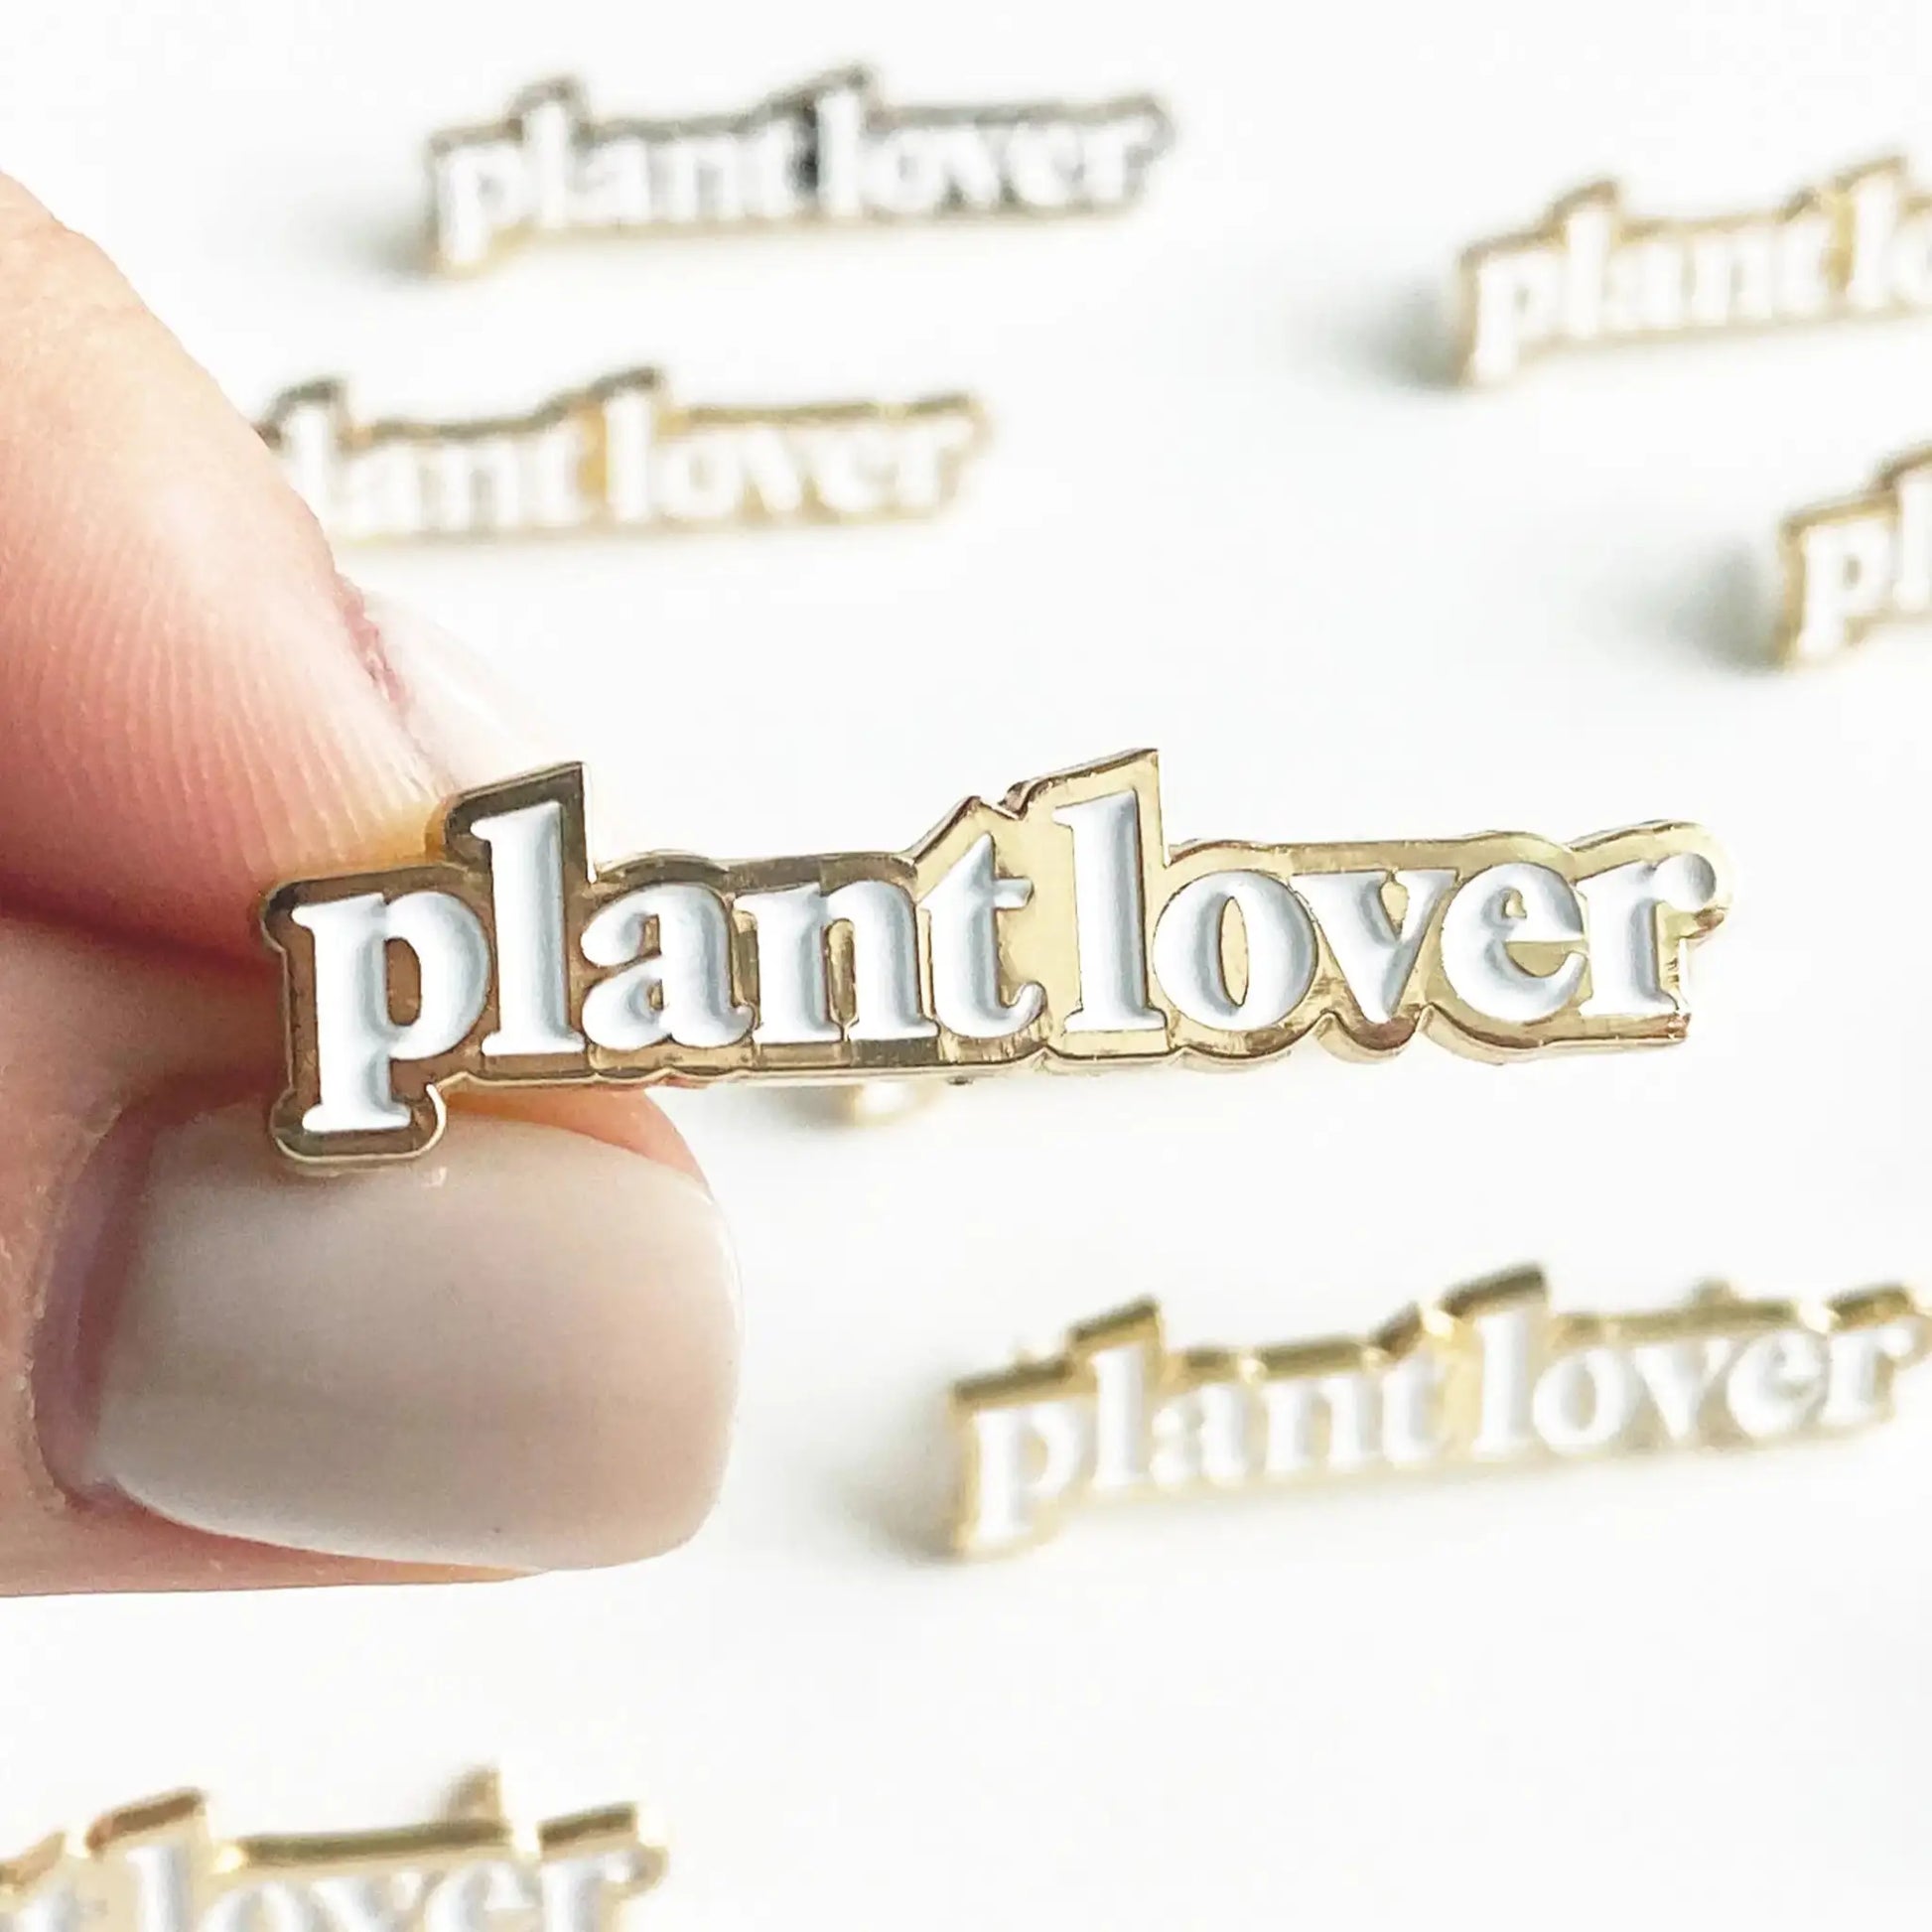 Plant Lover Lapel Pin - Pins